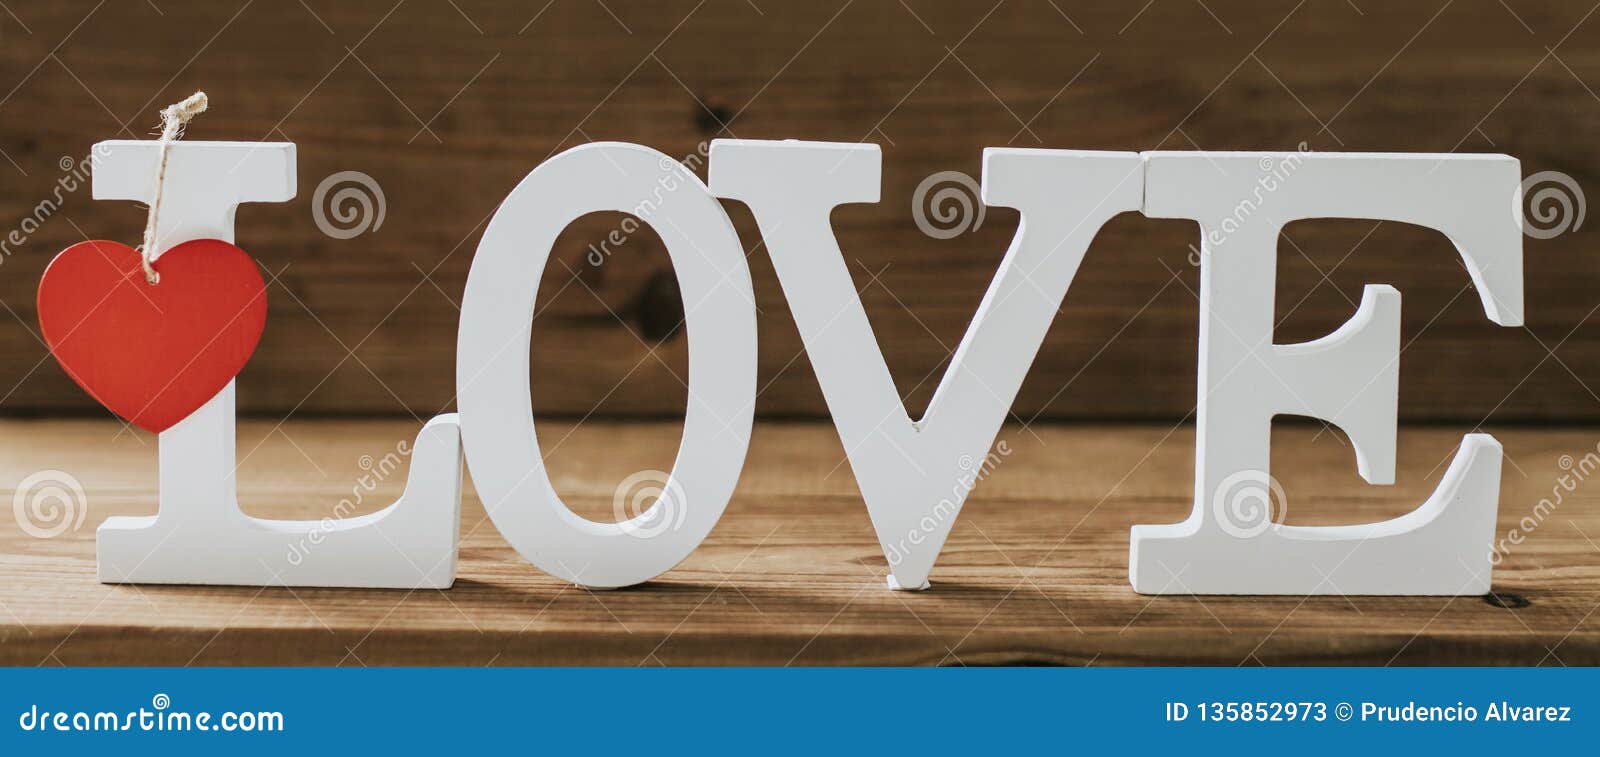 Message and love concept stock image. Image of concept - 135852973